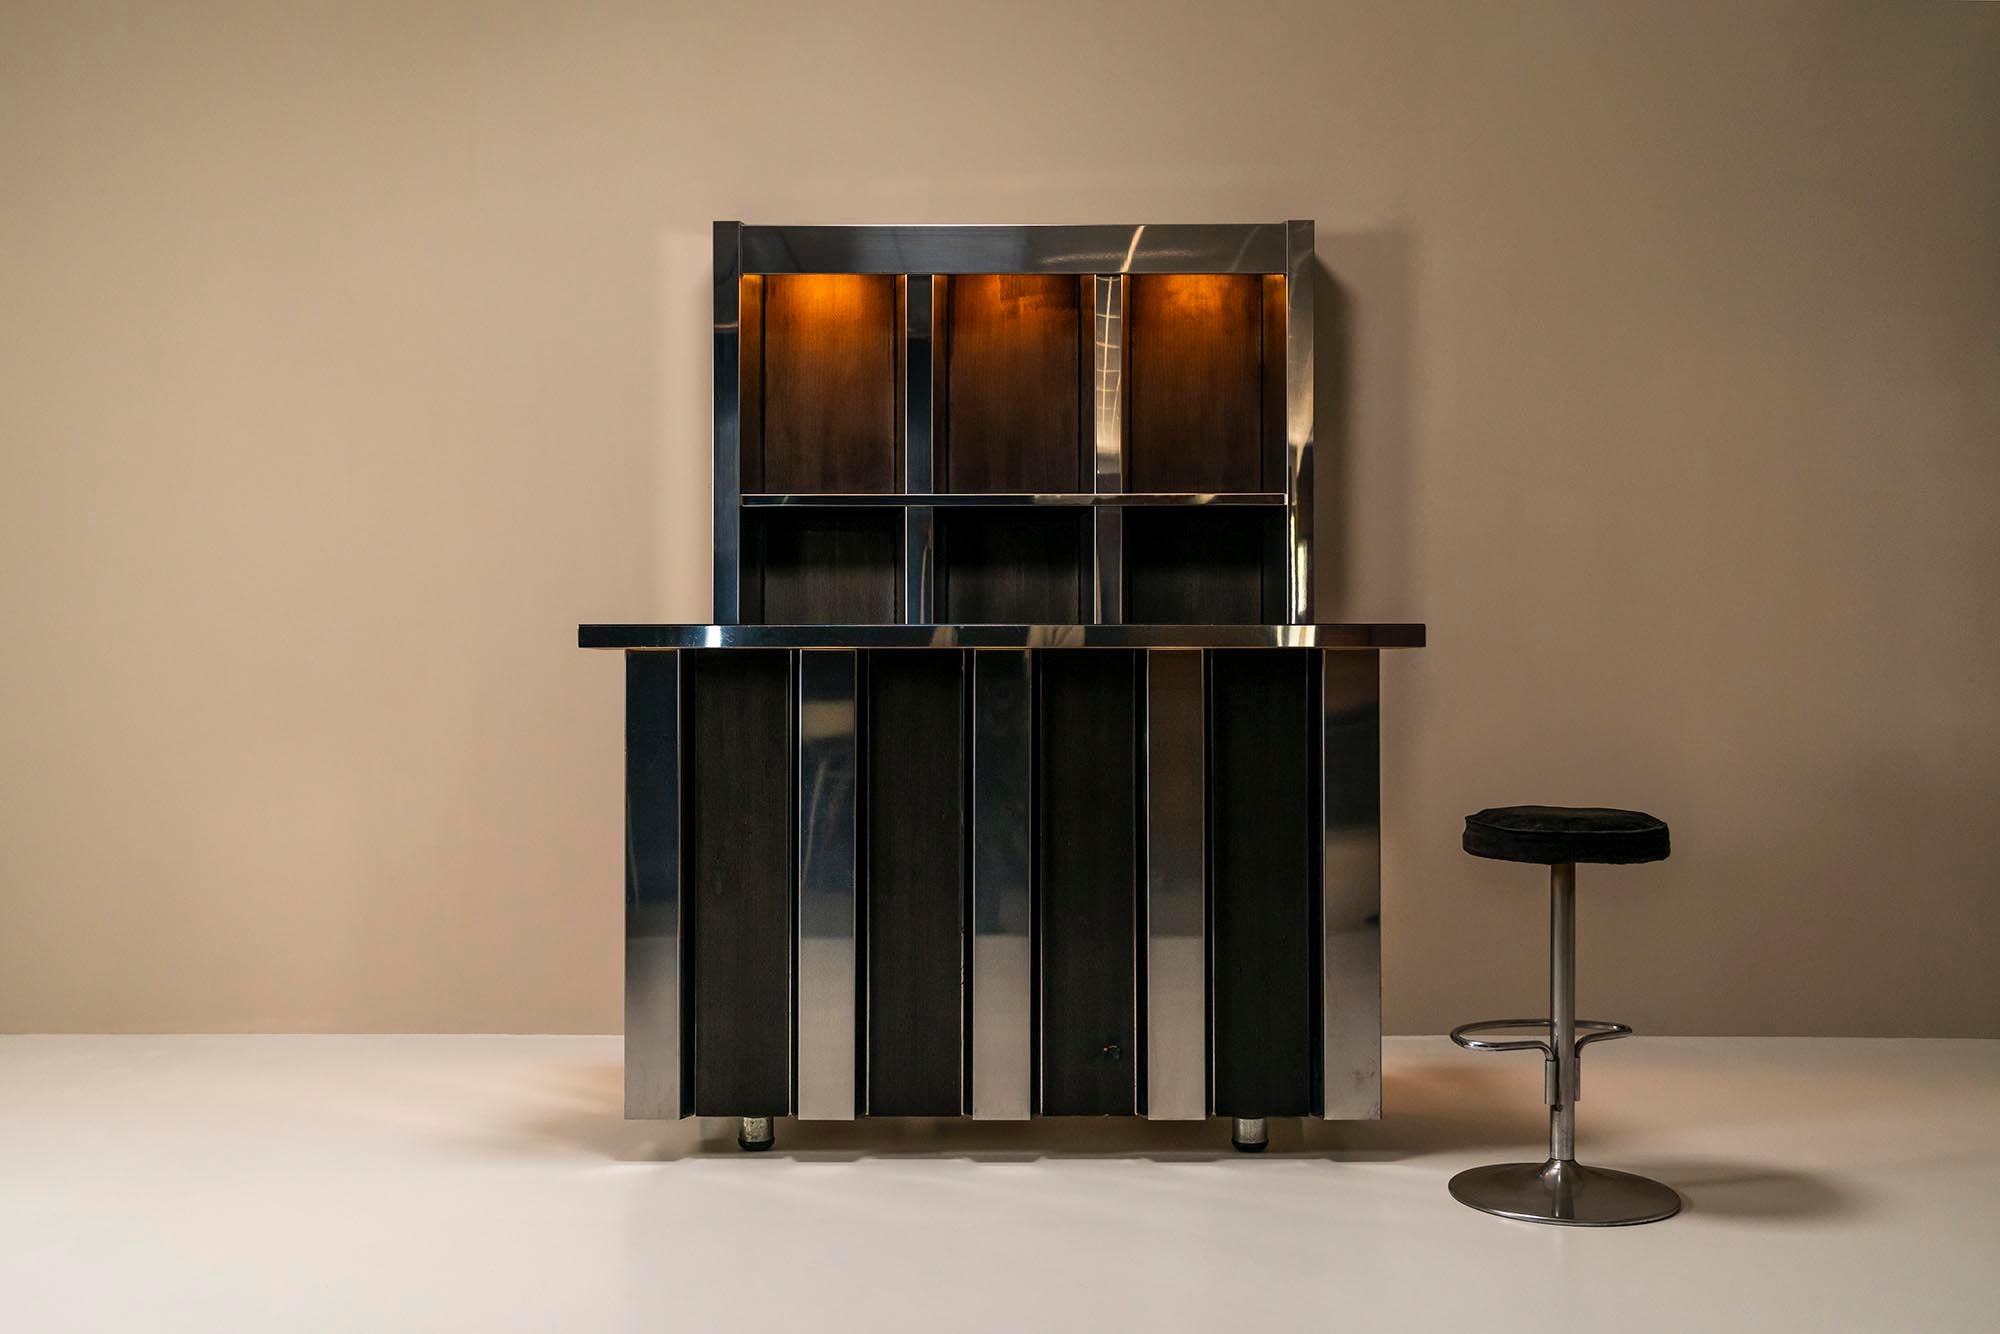 Hollywood Regency bar in aluminum and black suede in the style of Willy Rizzo.Imagine a glamorous cocktail evening with friends or a place where you can enjoy a cappuccino in the morning. This typical Hollywood regency style bar designed by Willy